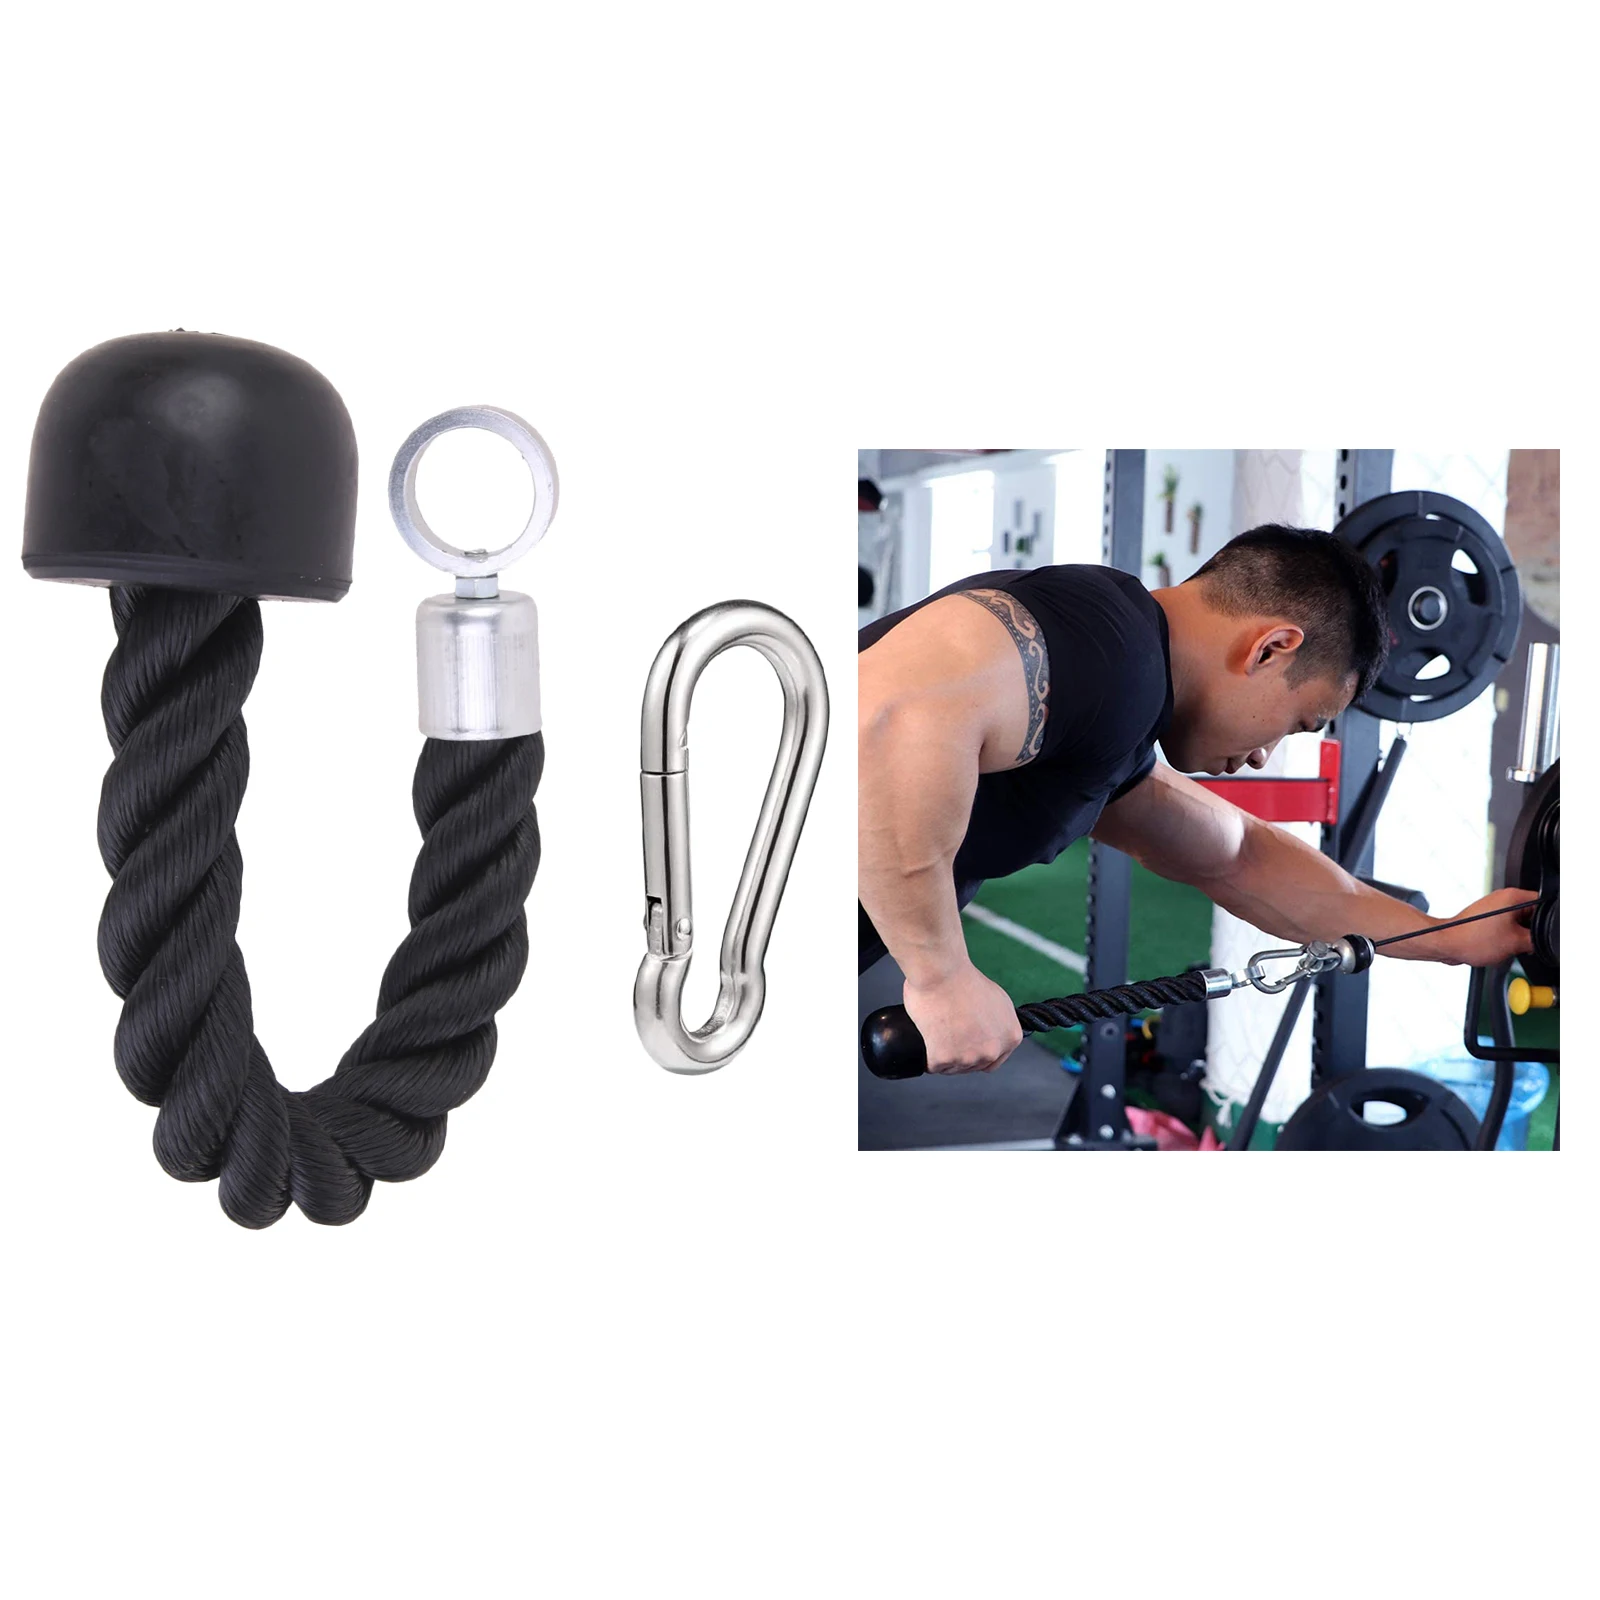 Triceps Single Rope LAT Pull Down Handle Cable Machine Multi-Gym Attachment with Carabiner for Arm Bicep Muscle Building